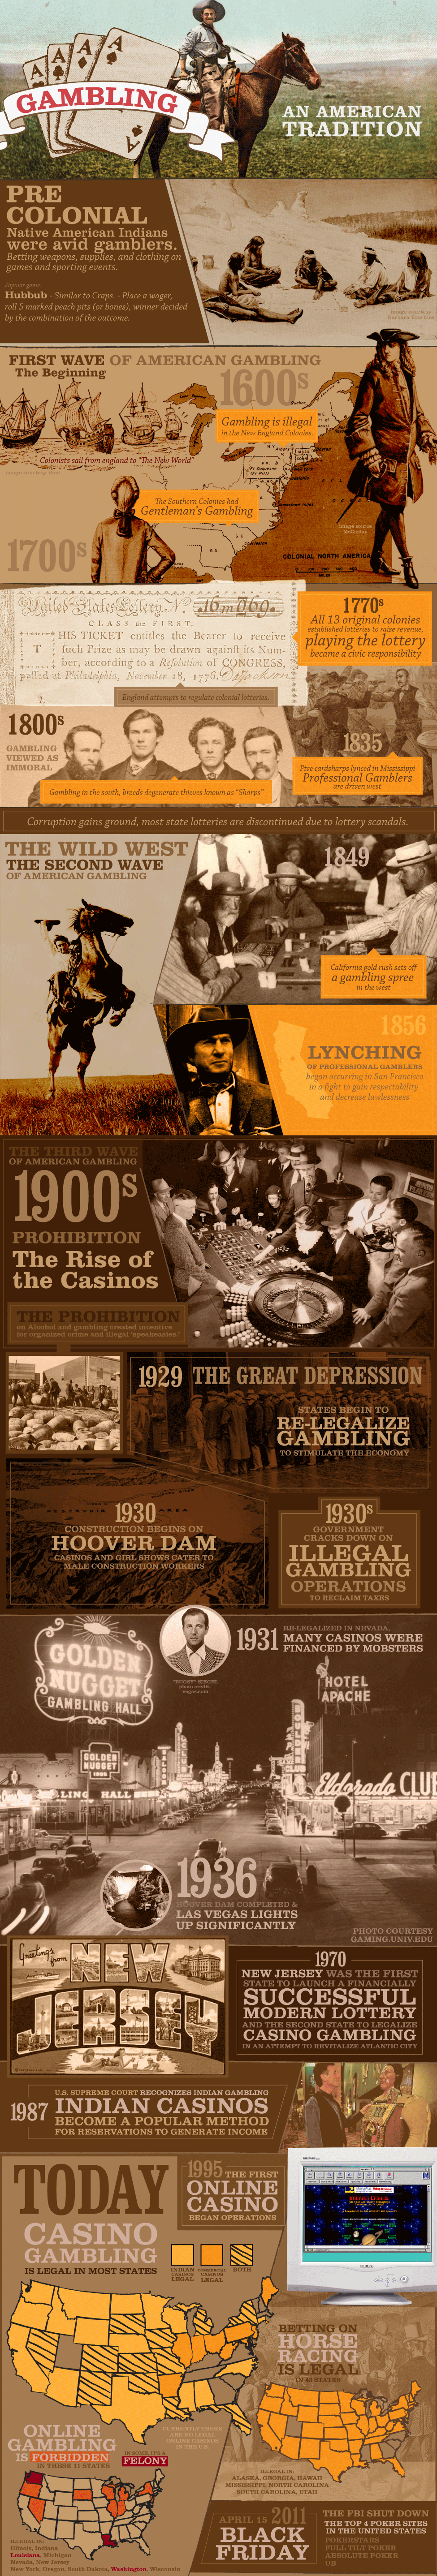 The History of USA Gambling and Casinos